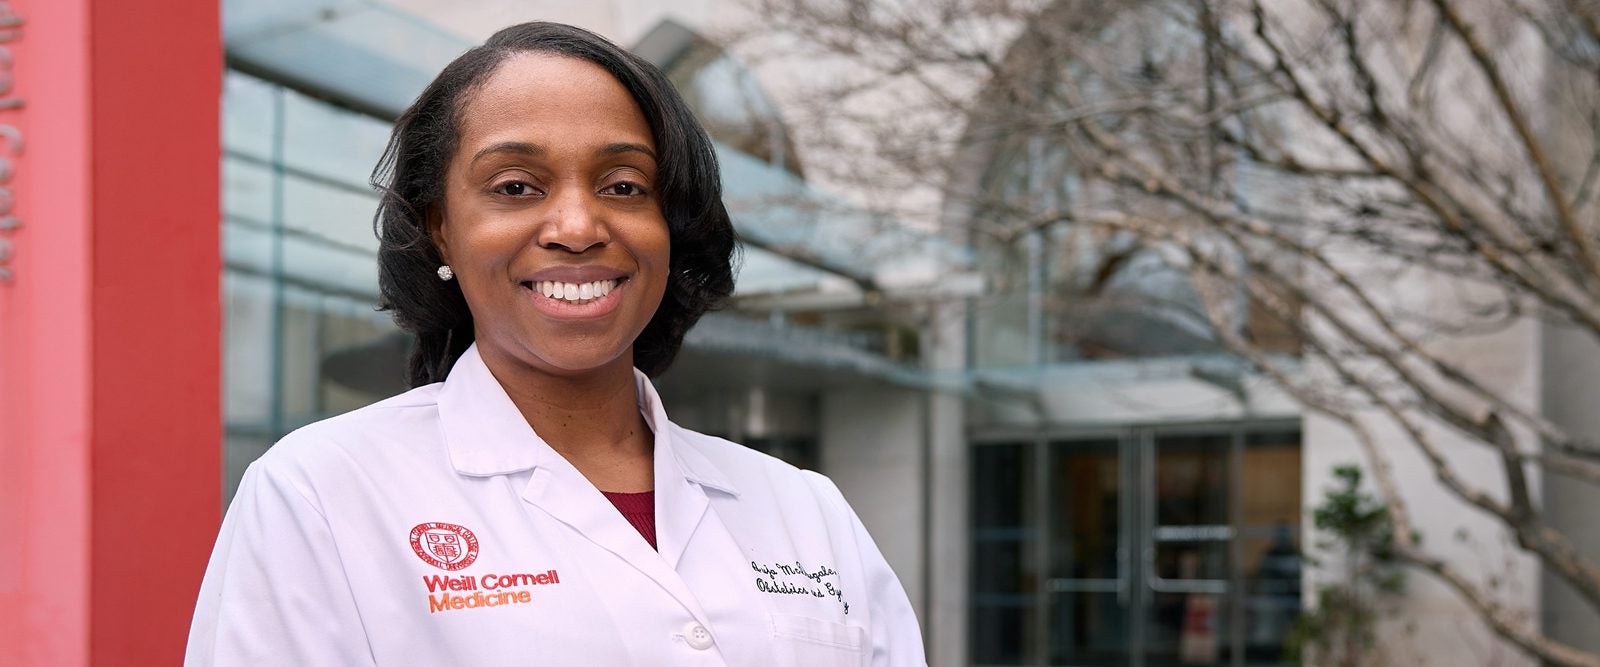 Meet The Doctor Whose Civil Rights Roots Are Driving Change For Black Mothers